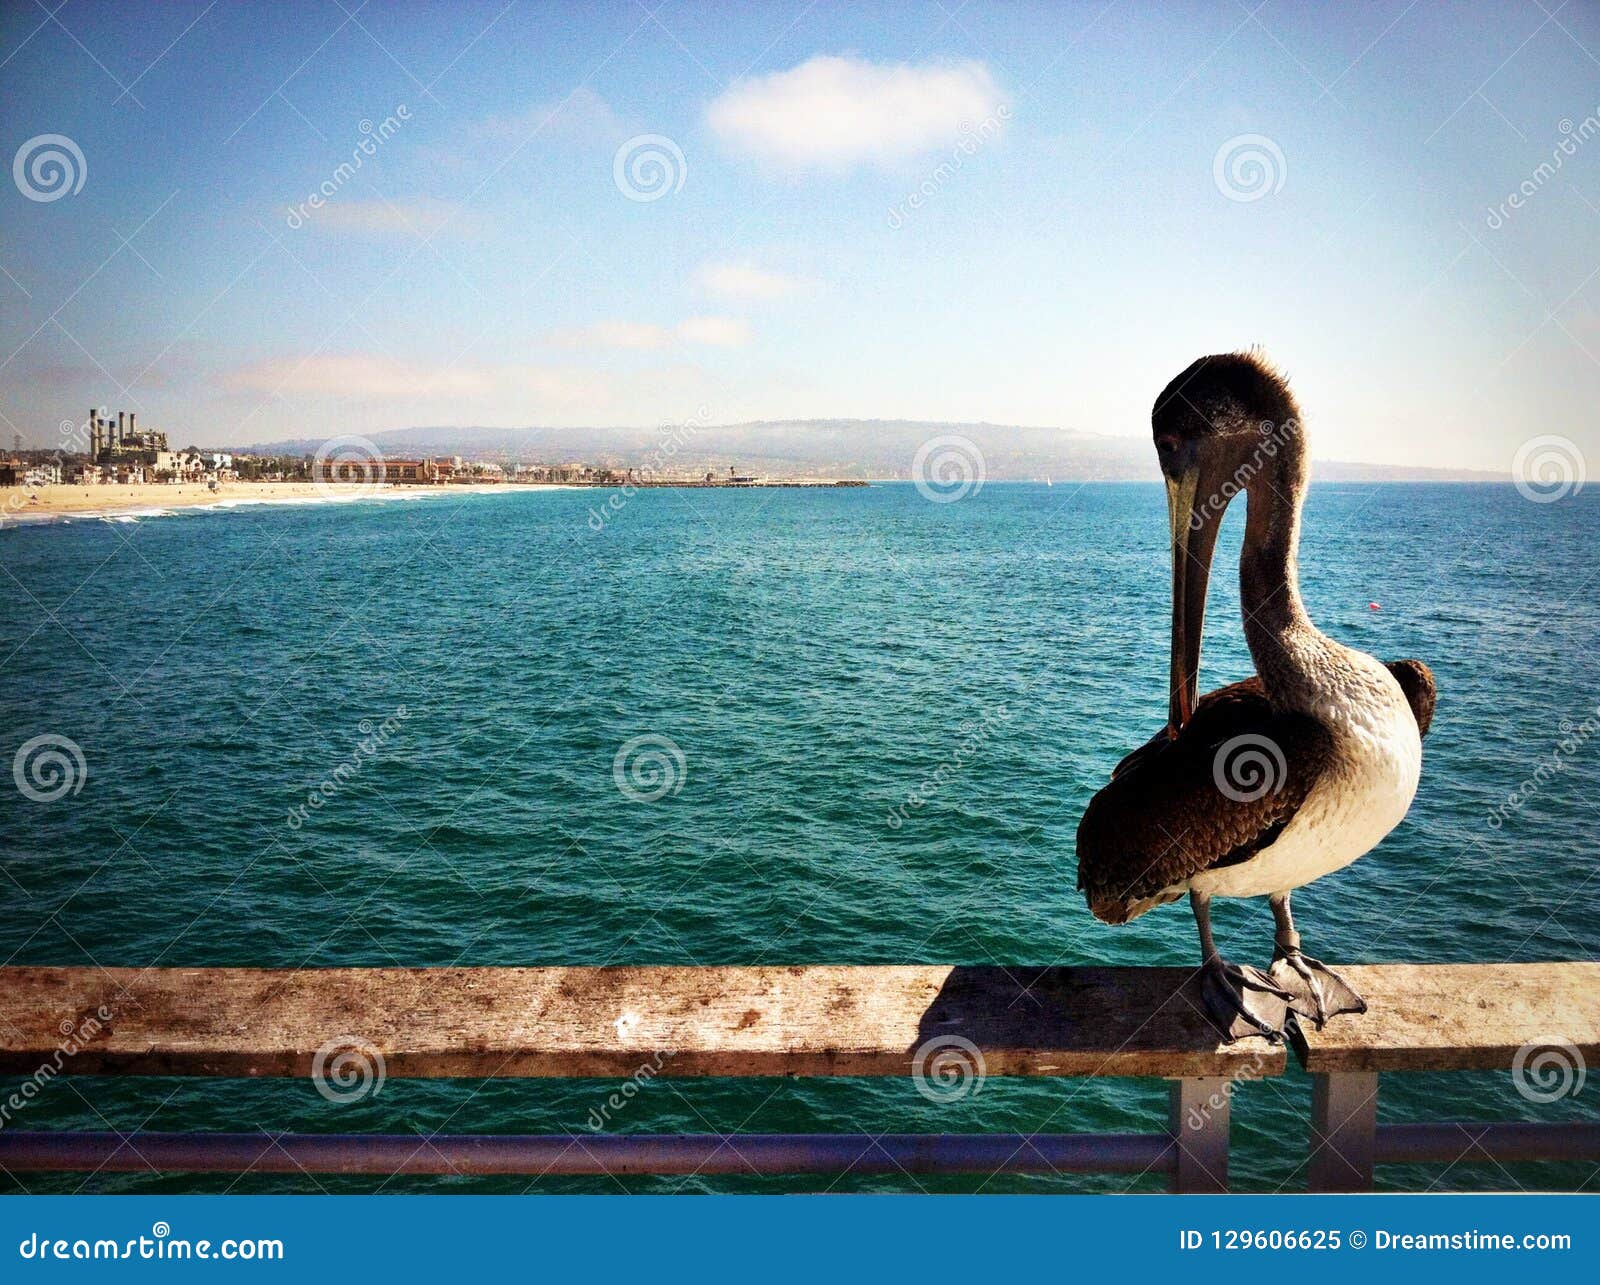 pelican rests on the railing of a pier in hermosa beach, california